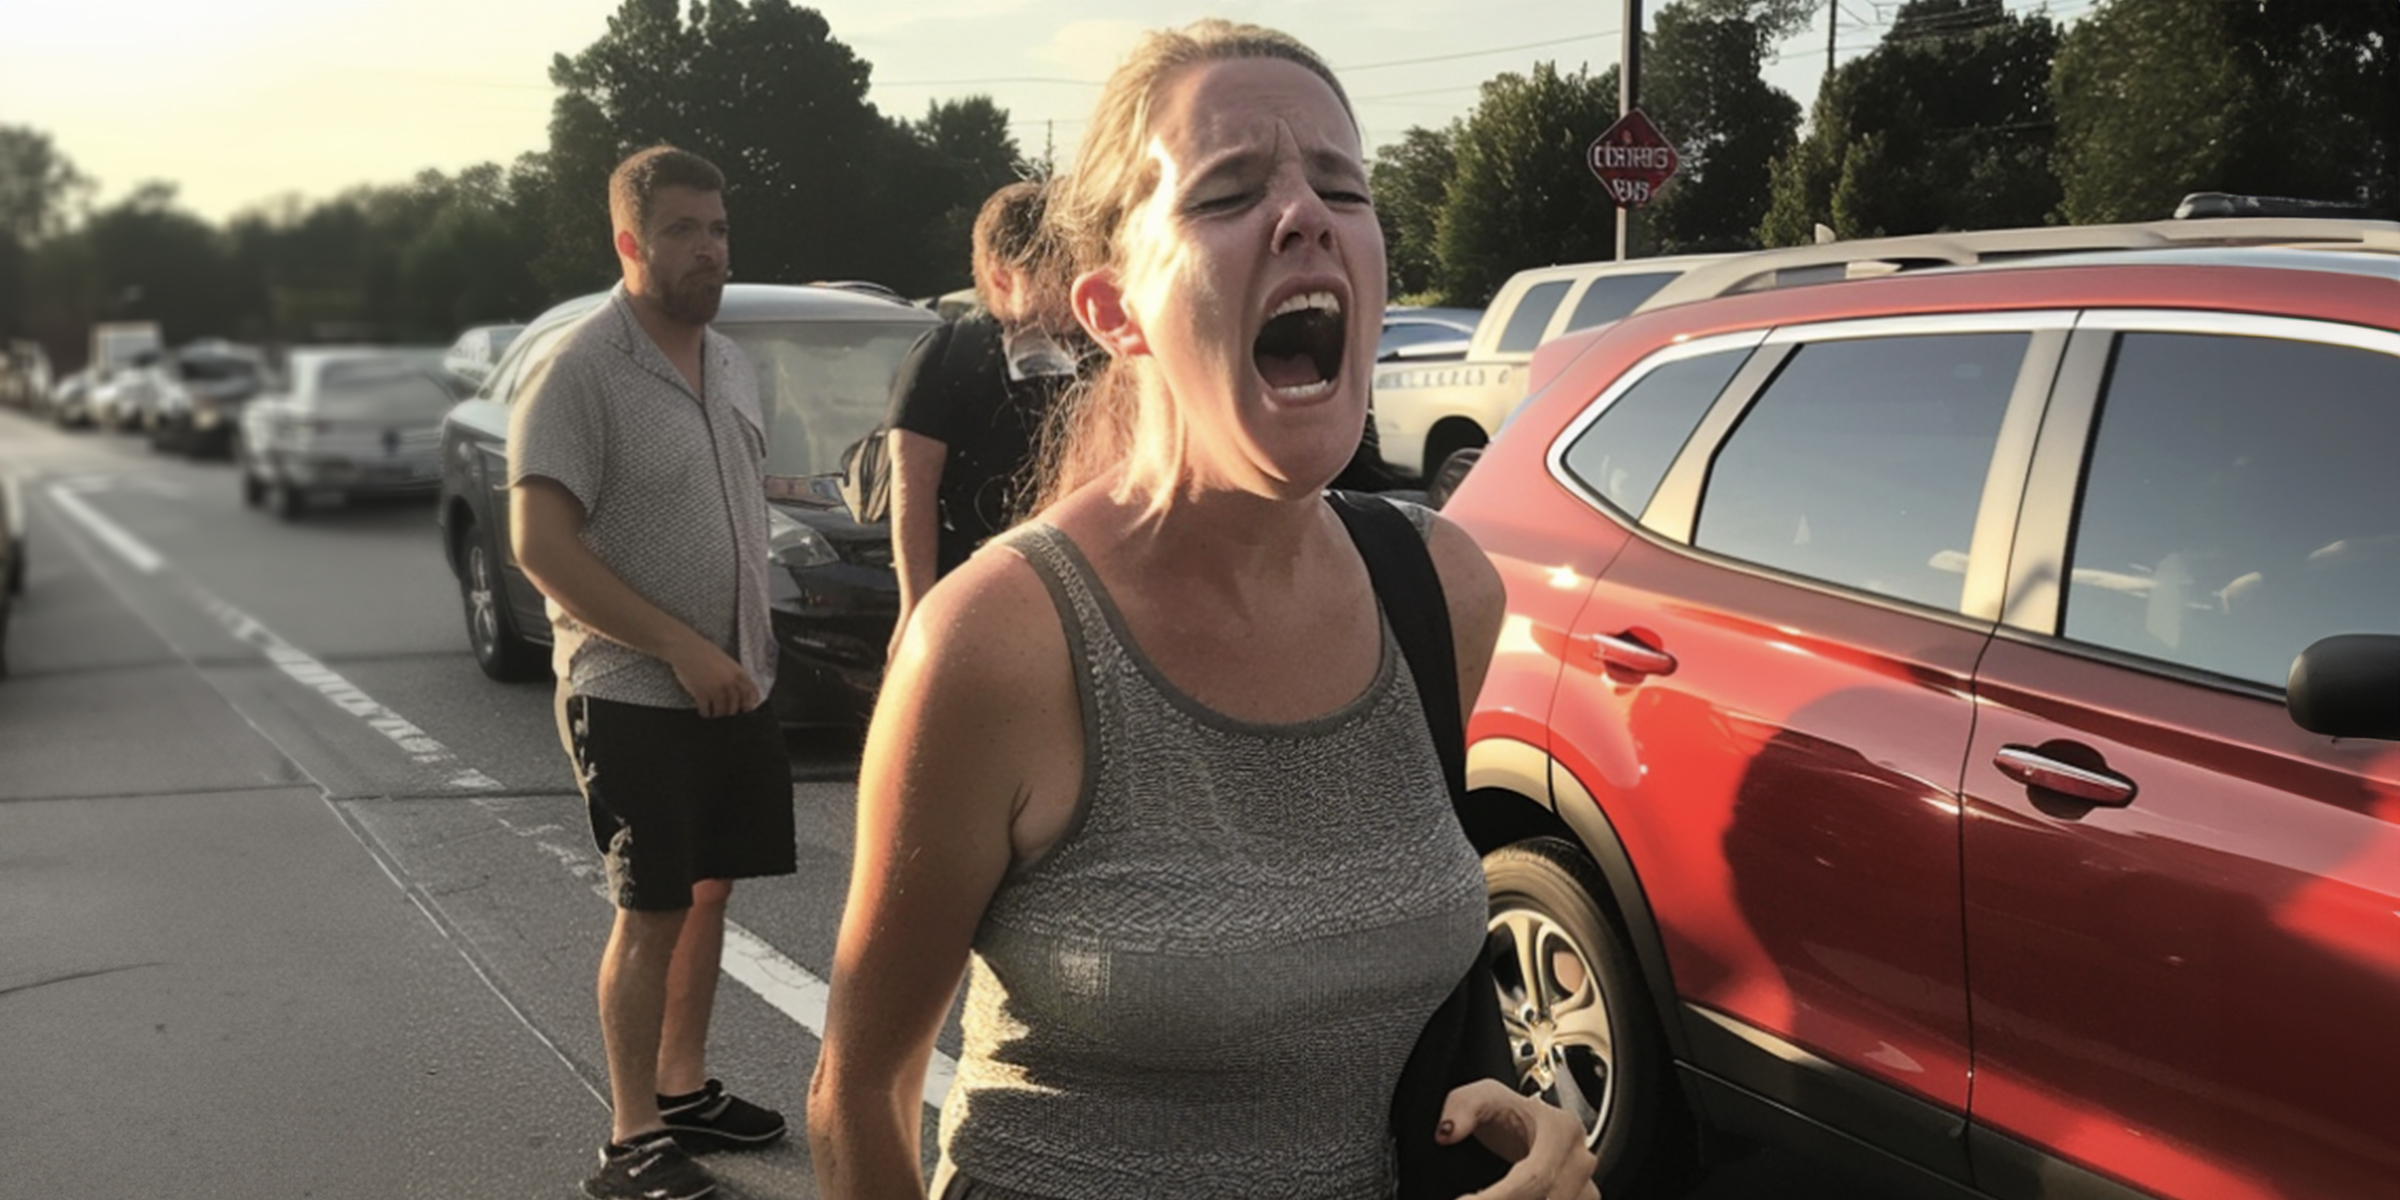 A woman screaming beside a red car | Source: Amomama